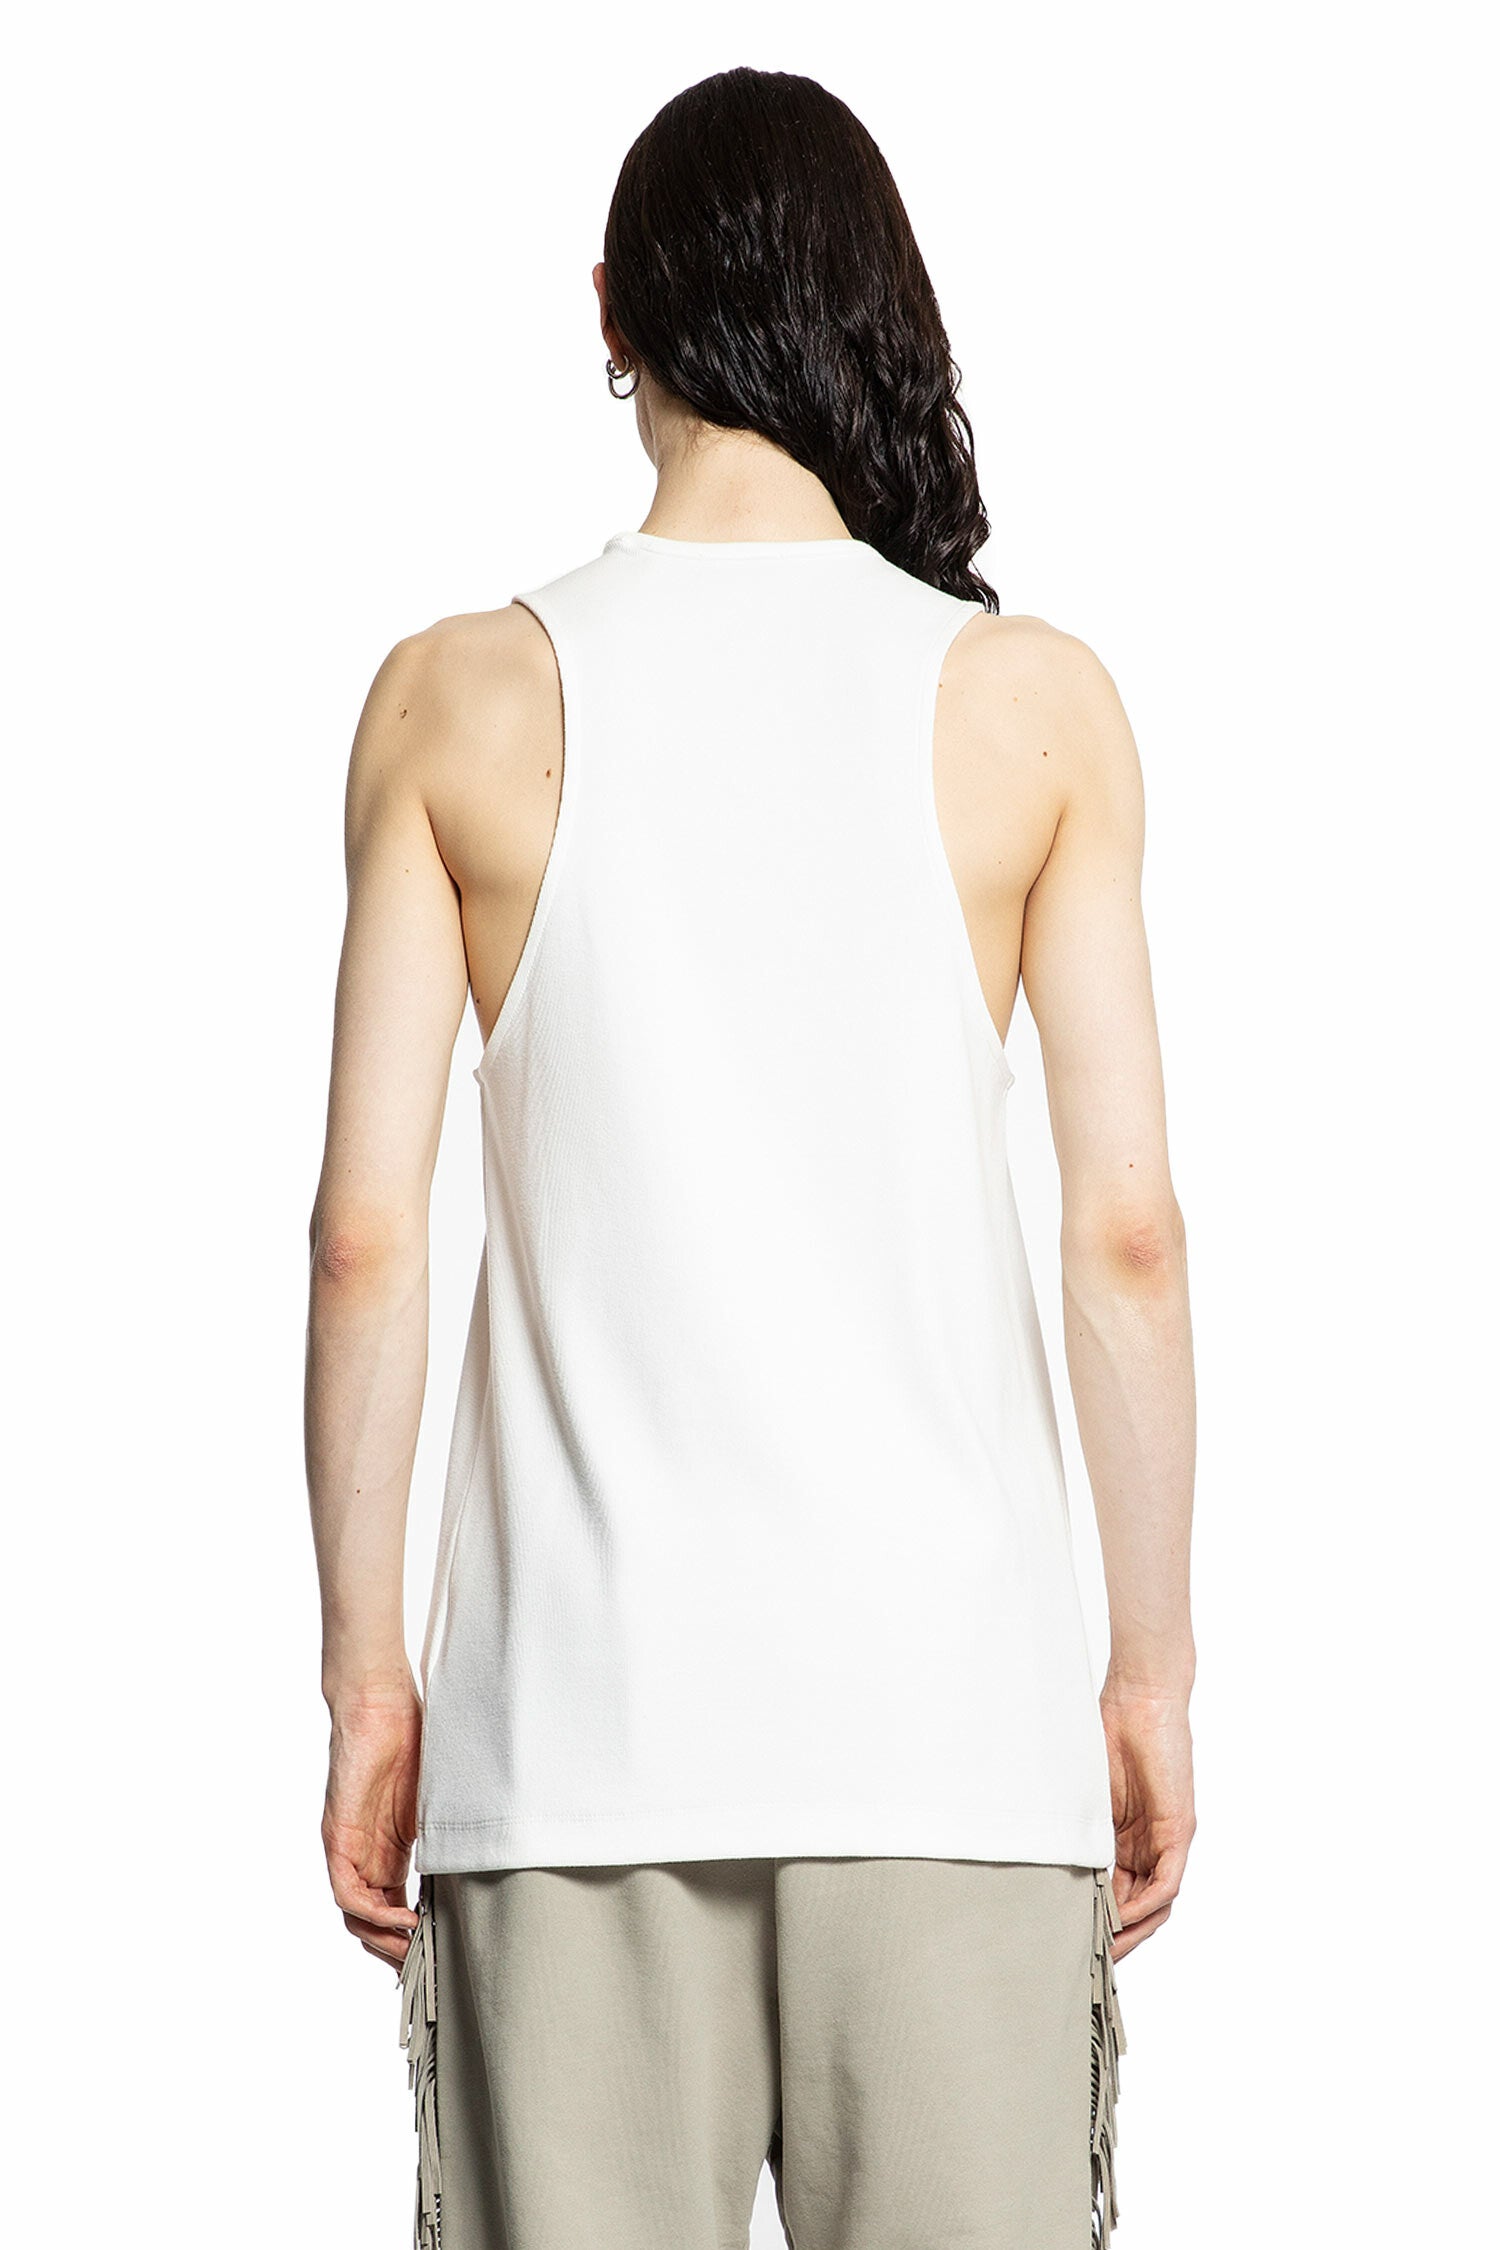 FEAR OF GOD MAN WHITE T-SHIRTS & TANK TOPS